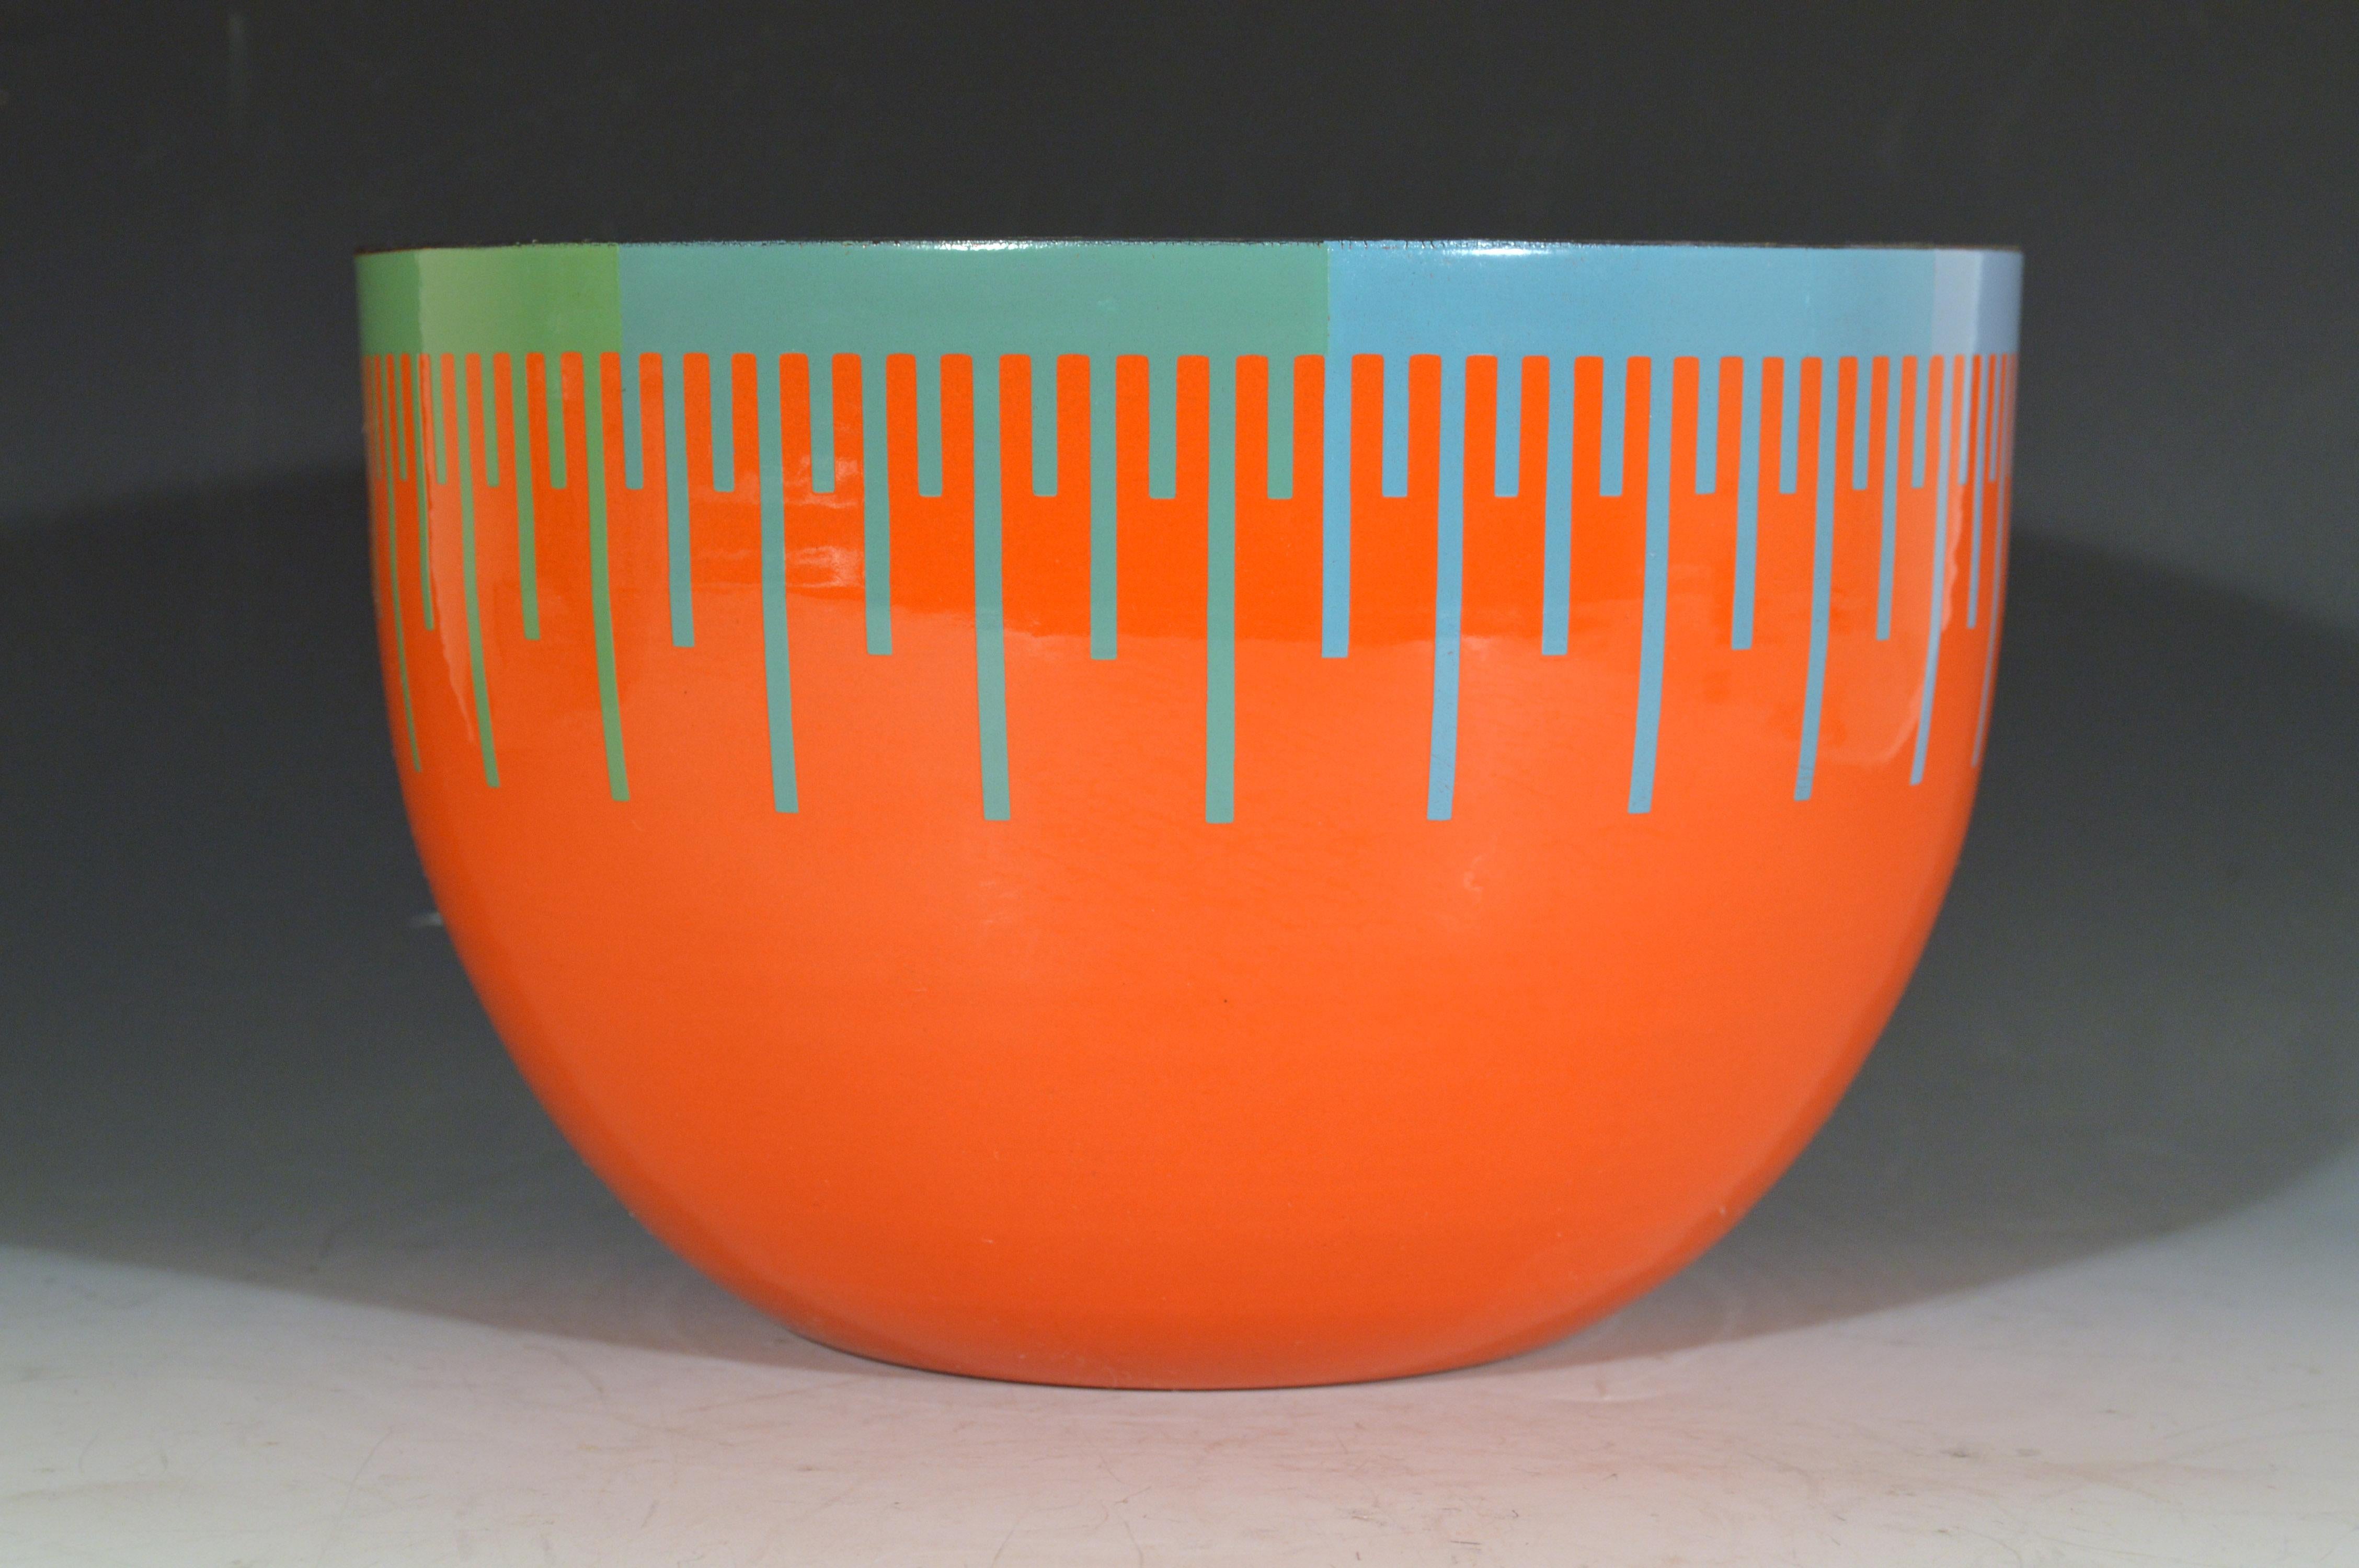 Rare Richard Anuszkiewicz Op Art enamel bowl
Made for the Hirshhorn Museum and Sculpture Garden, Smithsonian Institute, Washington D.C. 
1976

A deep, orange-ground exterior enamel on metal bowl with variations of blues and greens around the rim